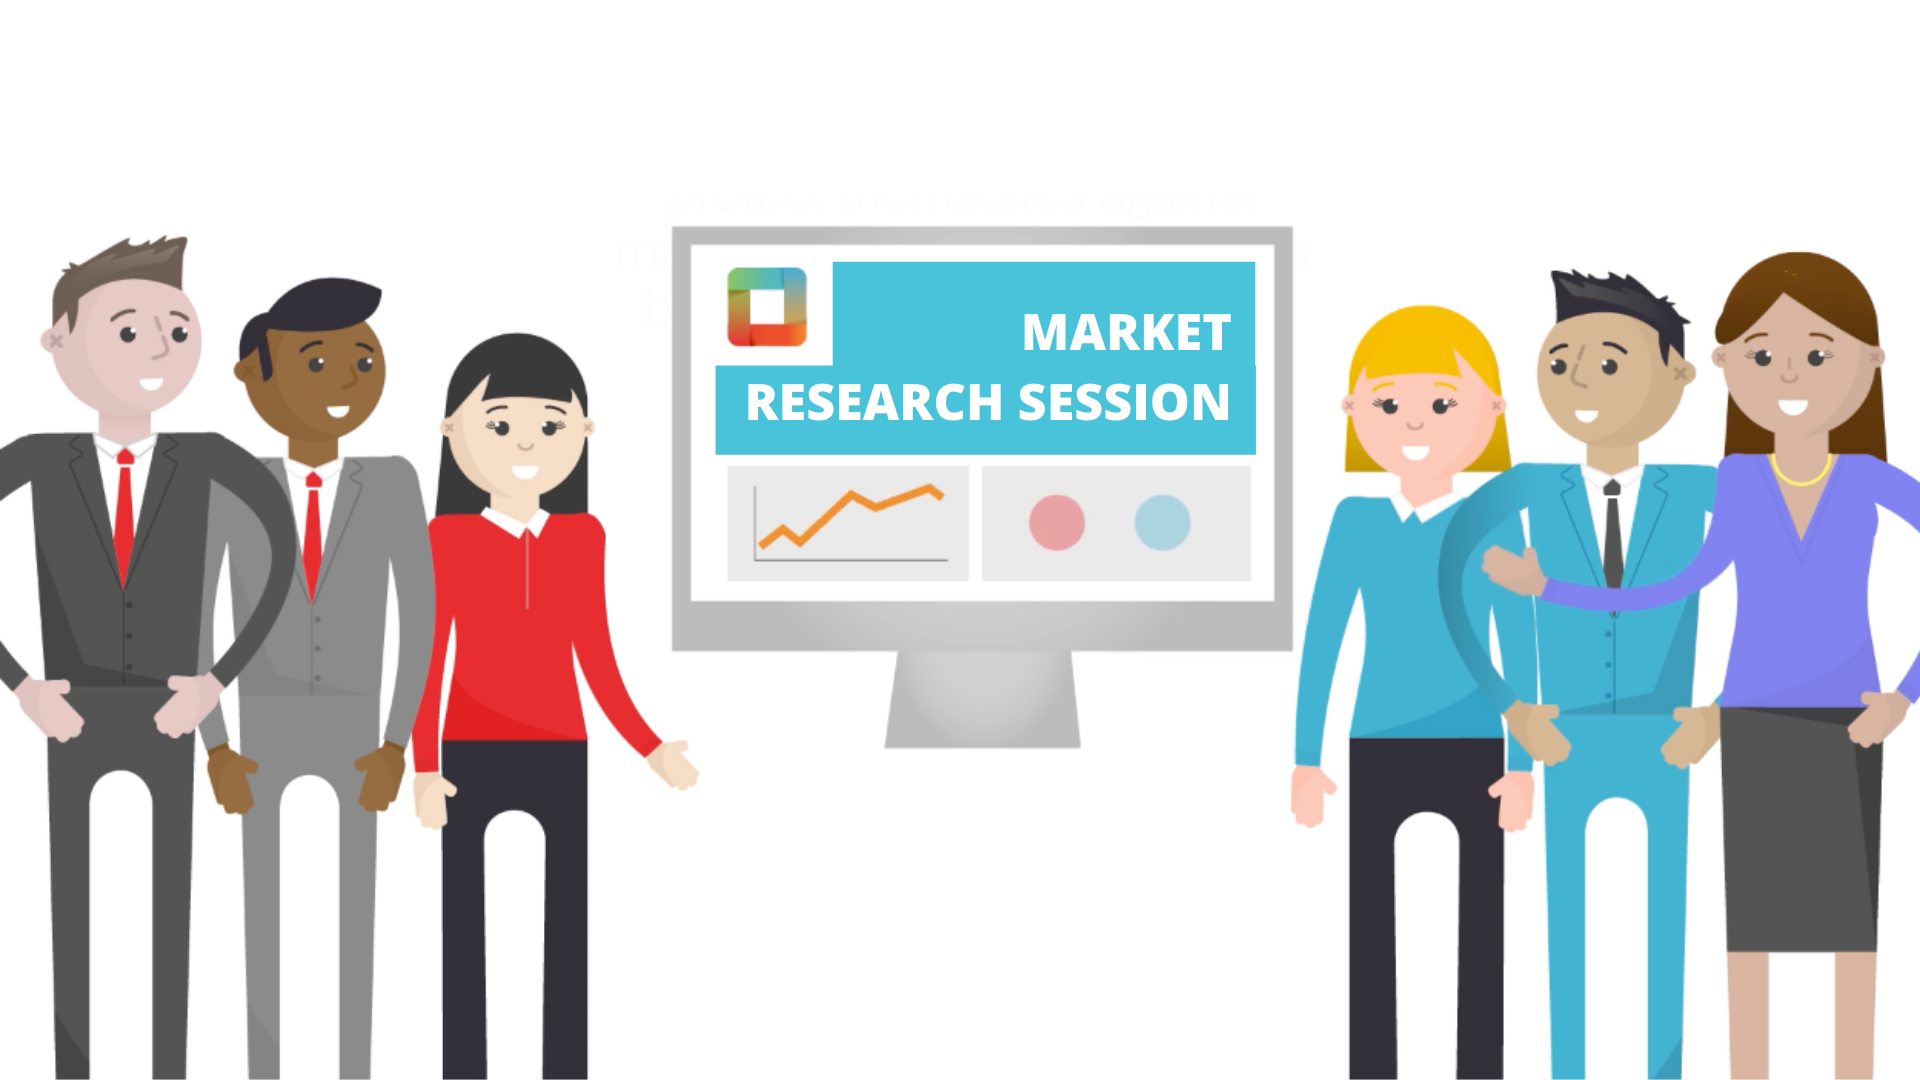 Market research session